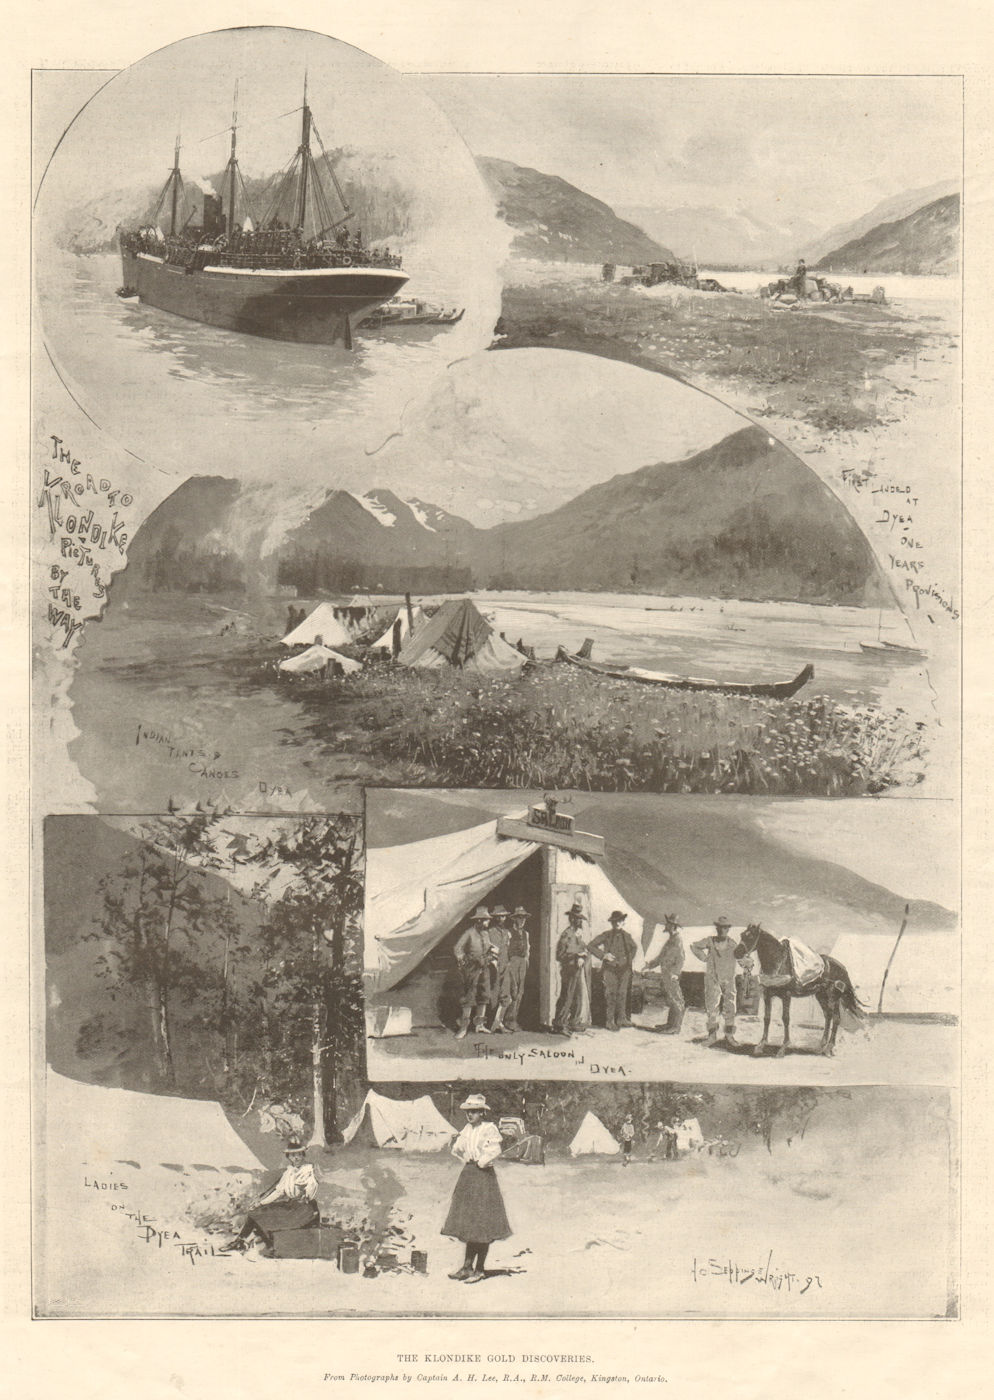 Associate Product The Klondike gold discoveries. Canada. Mining 1897 antique ILN full page print